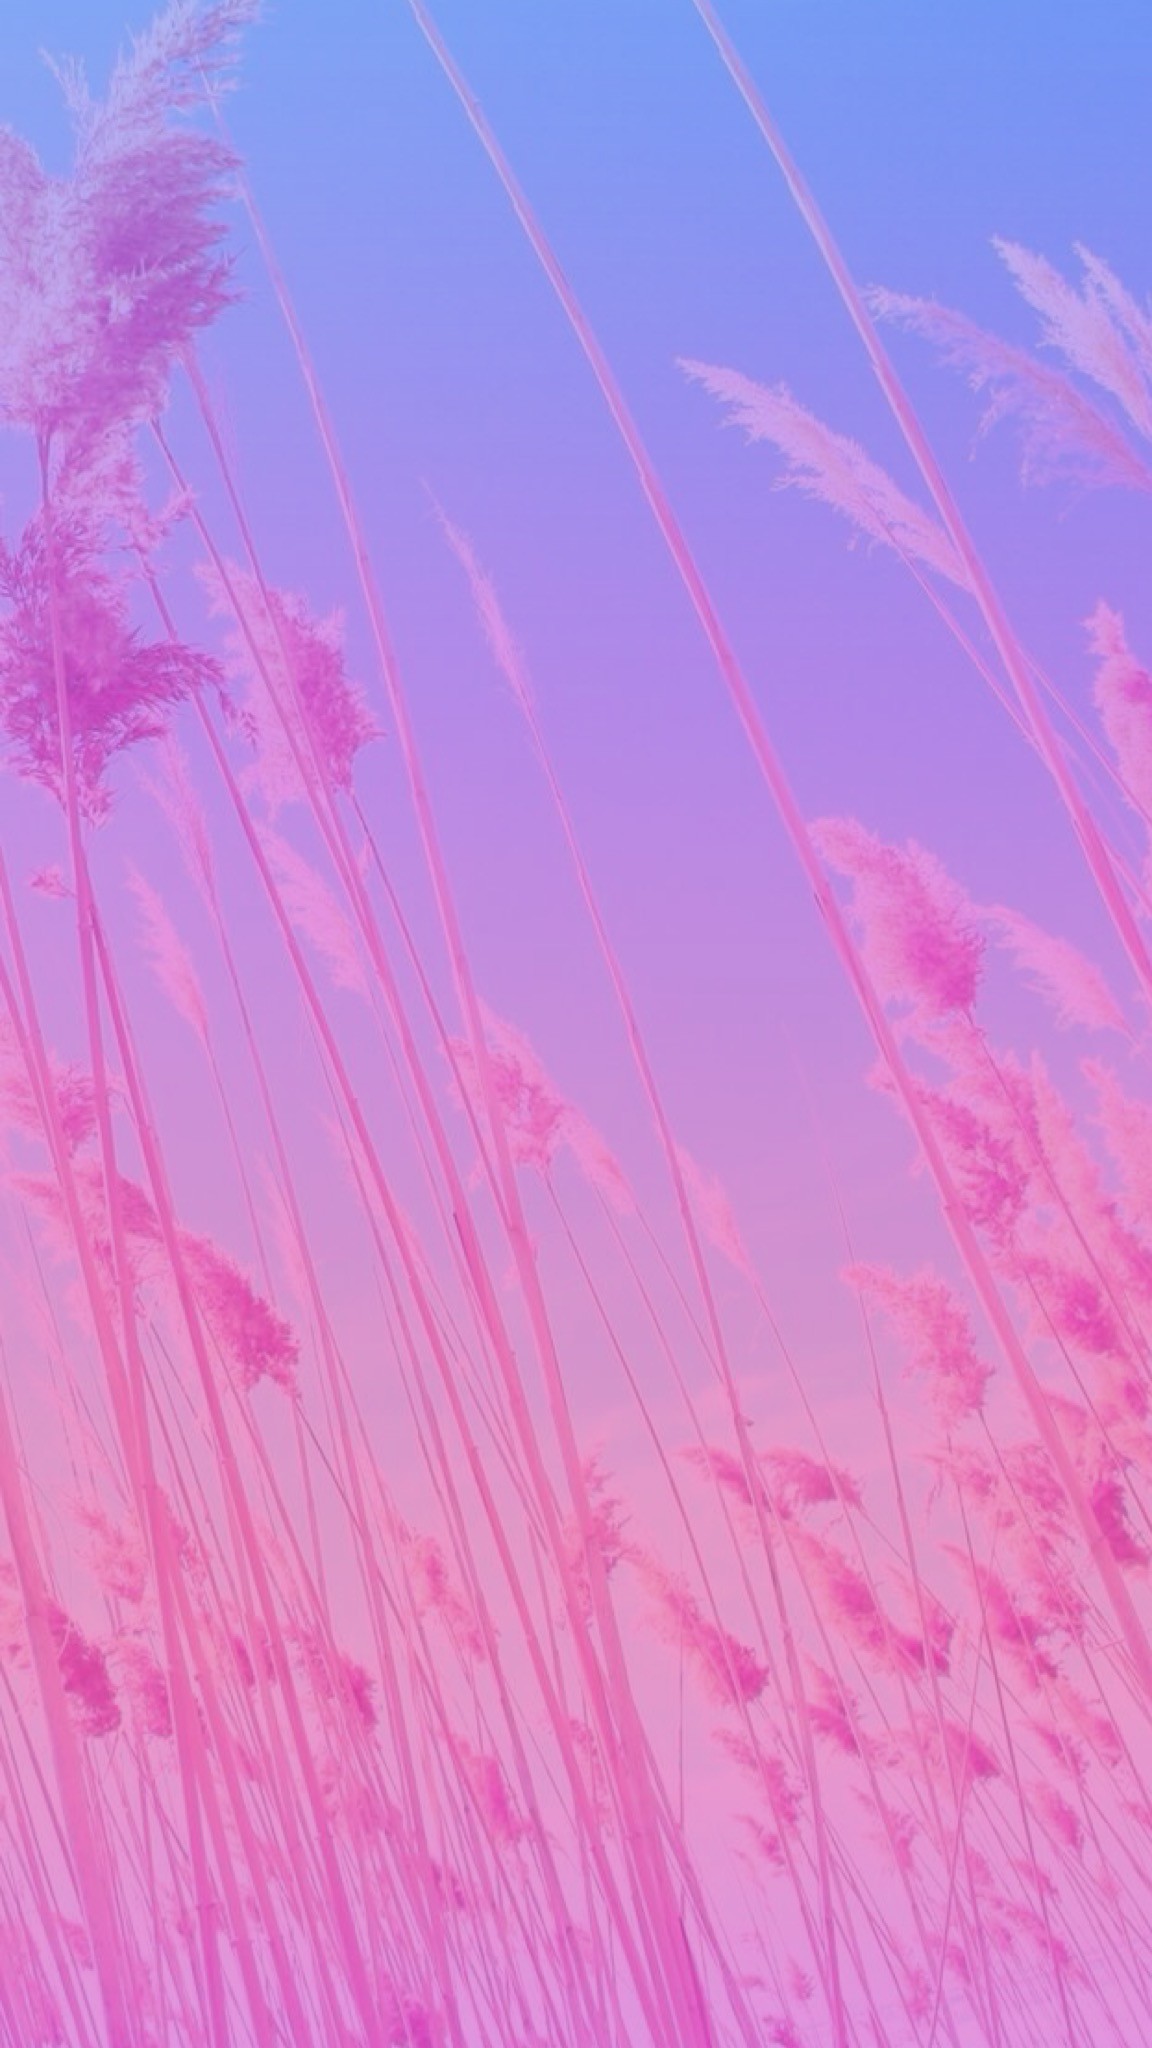 1152x2048 Wallpaper backgrounds Â· Original image not by me! I just made the  ombrÃ©/gradient. Pink,